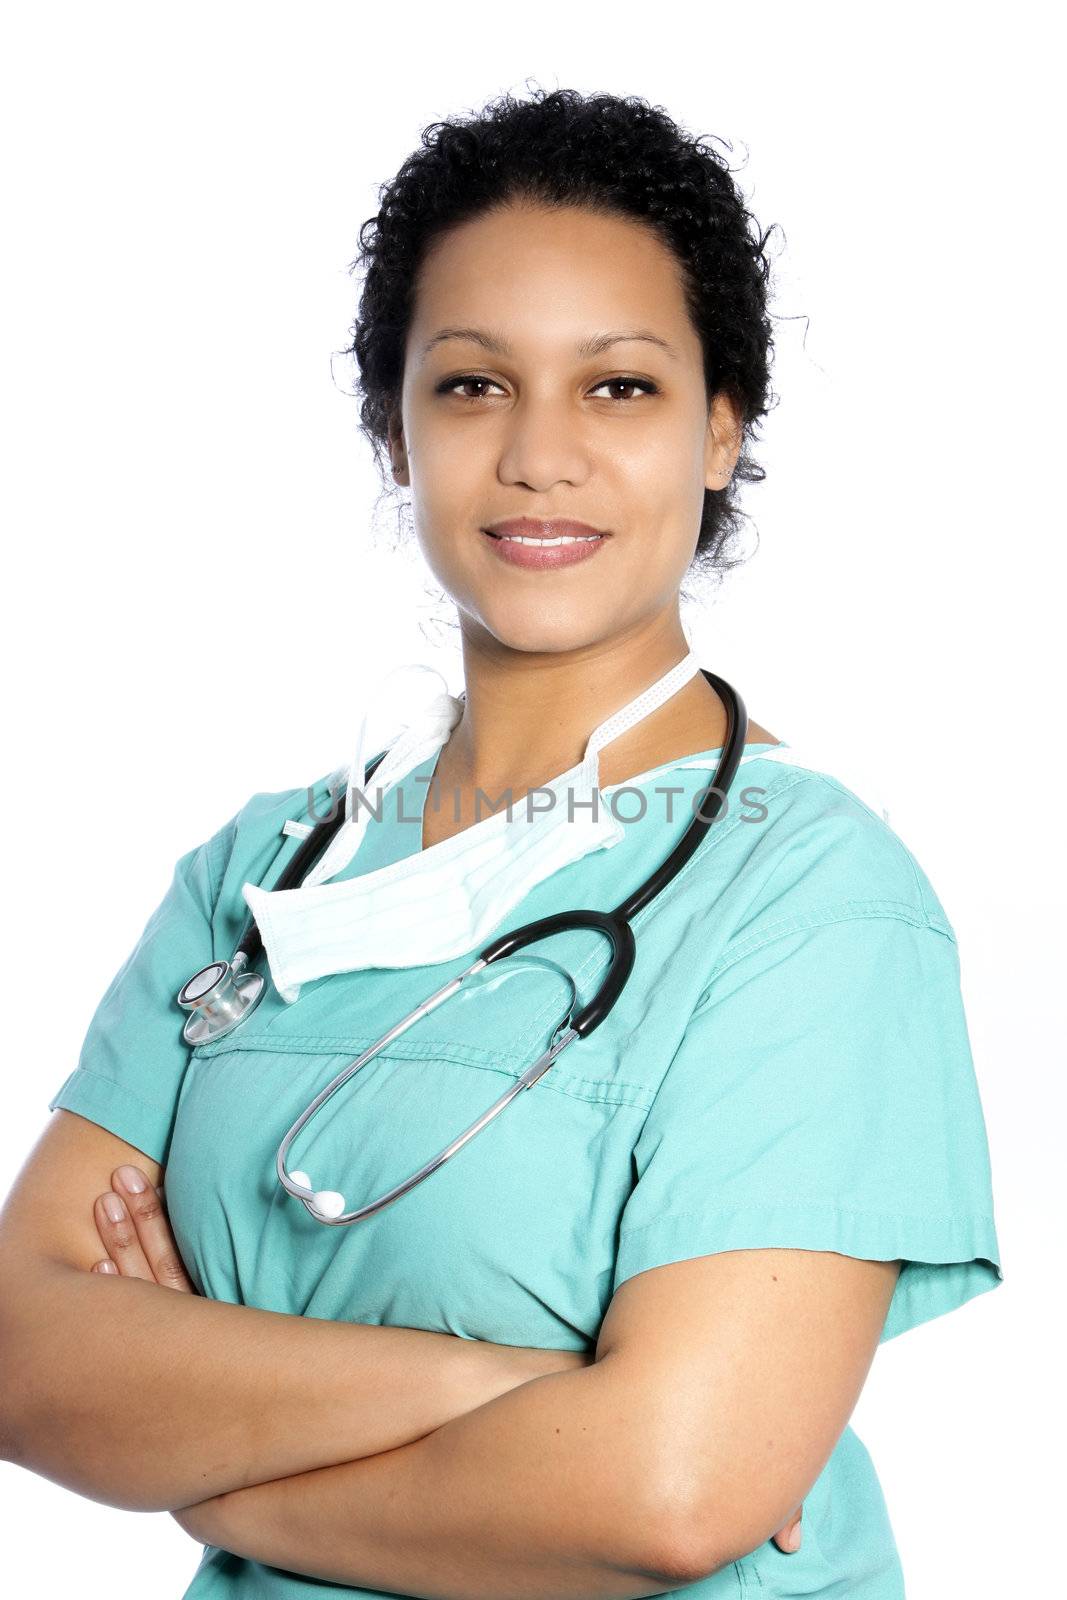 Female African American doctor by Farina6000